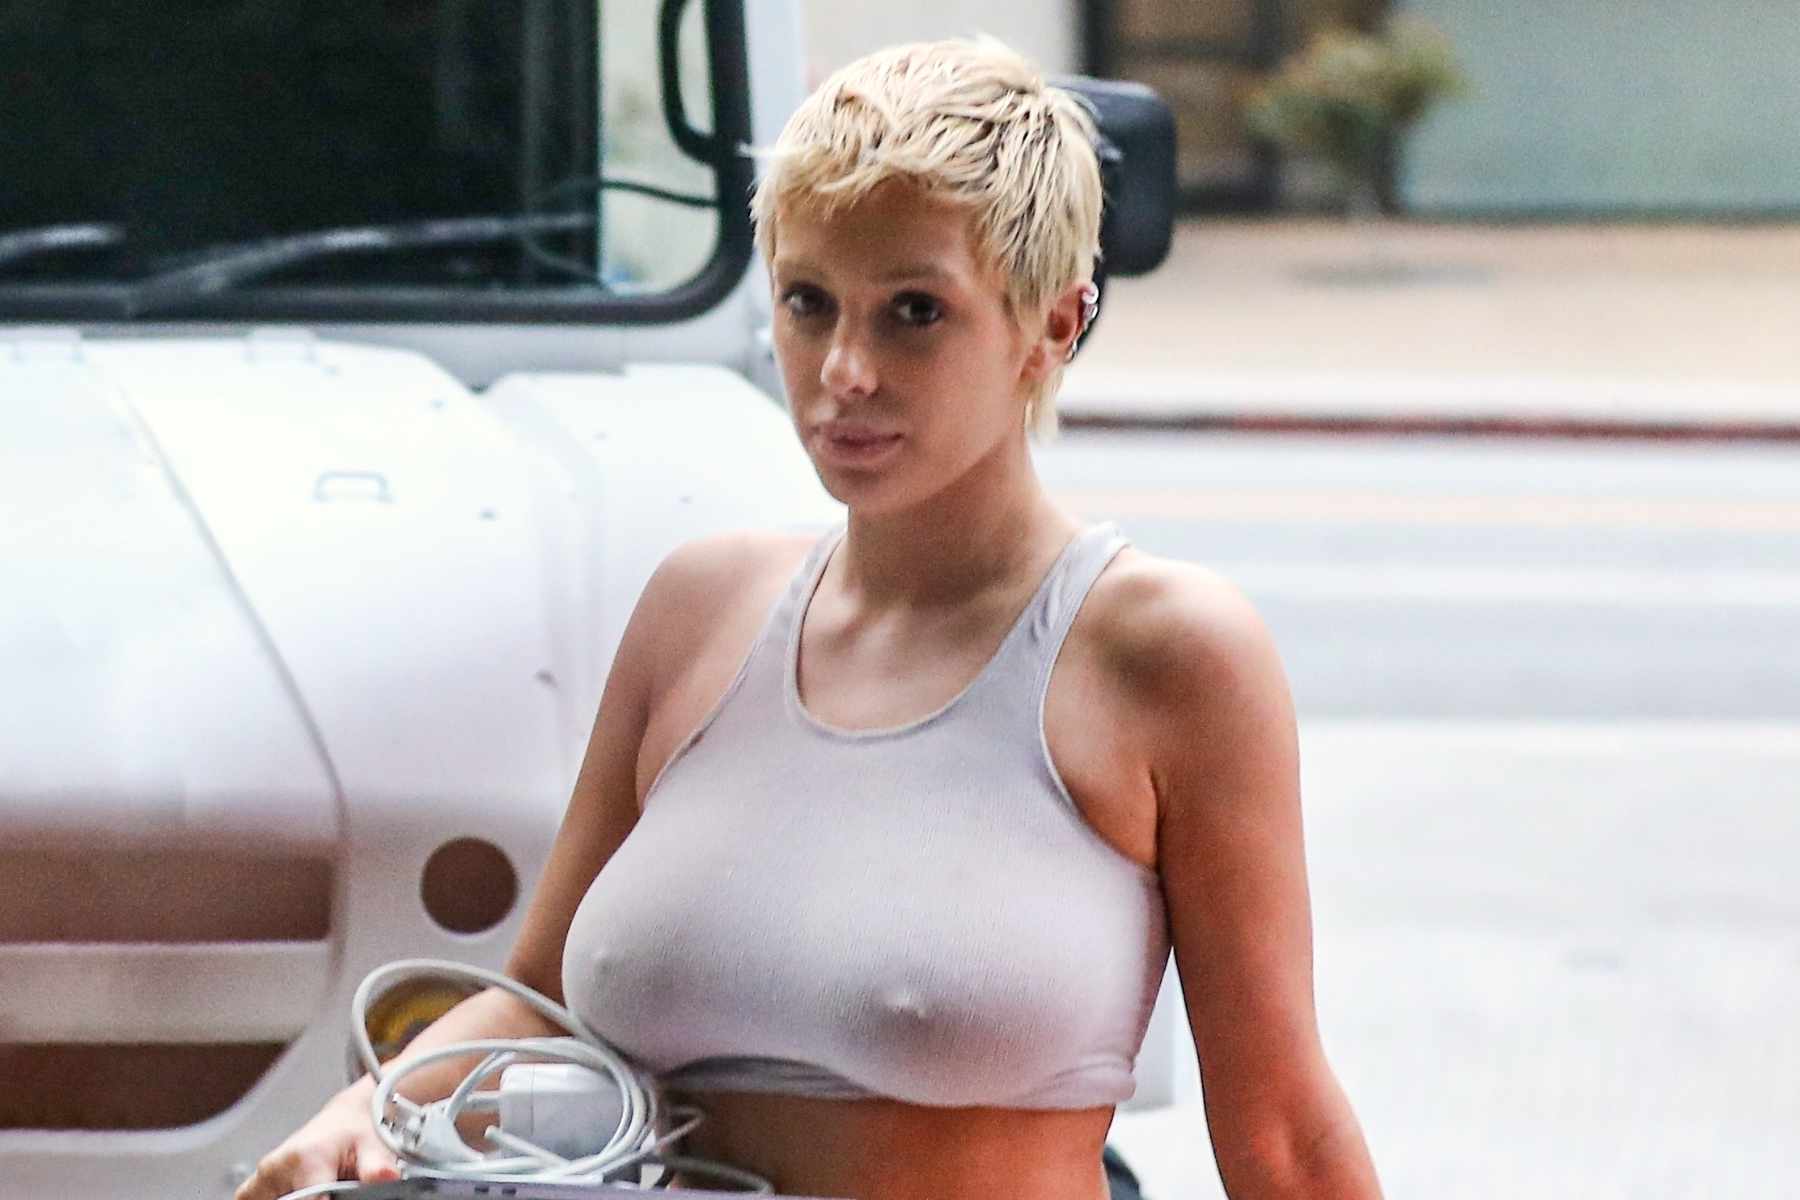 Bianca Censori, Kanye West's wife, is seen wearing a see-through sportsbra & leggings with short blond hair while holding a Macbook